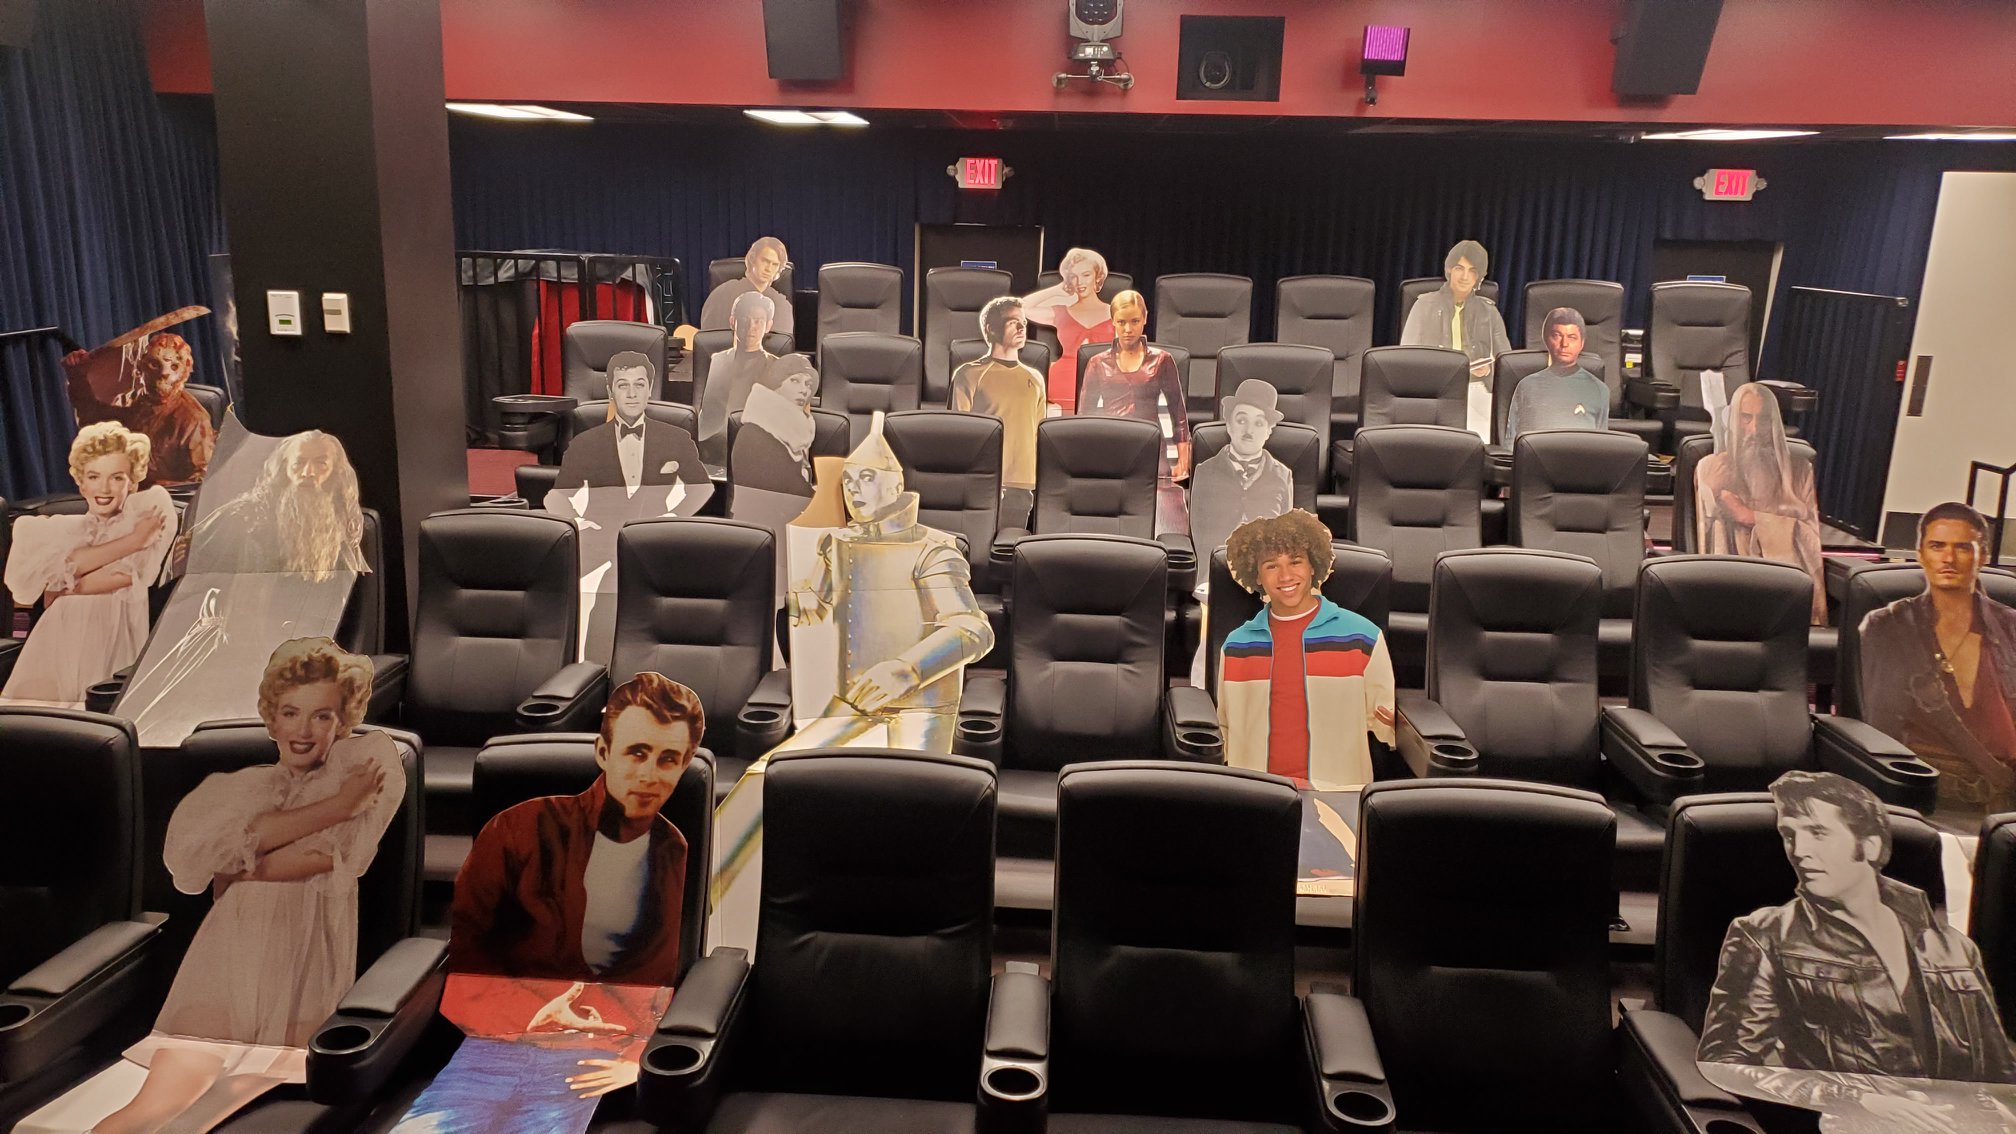 Arena Cinelounge theater